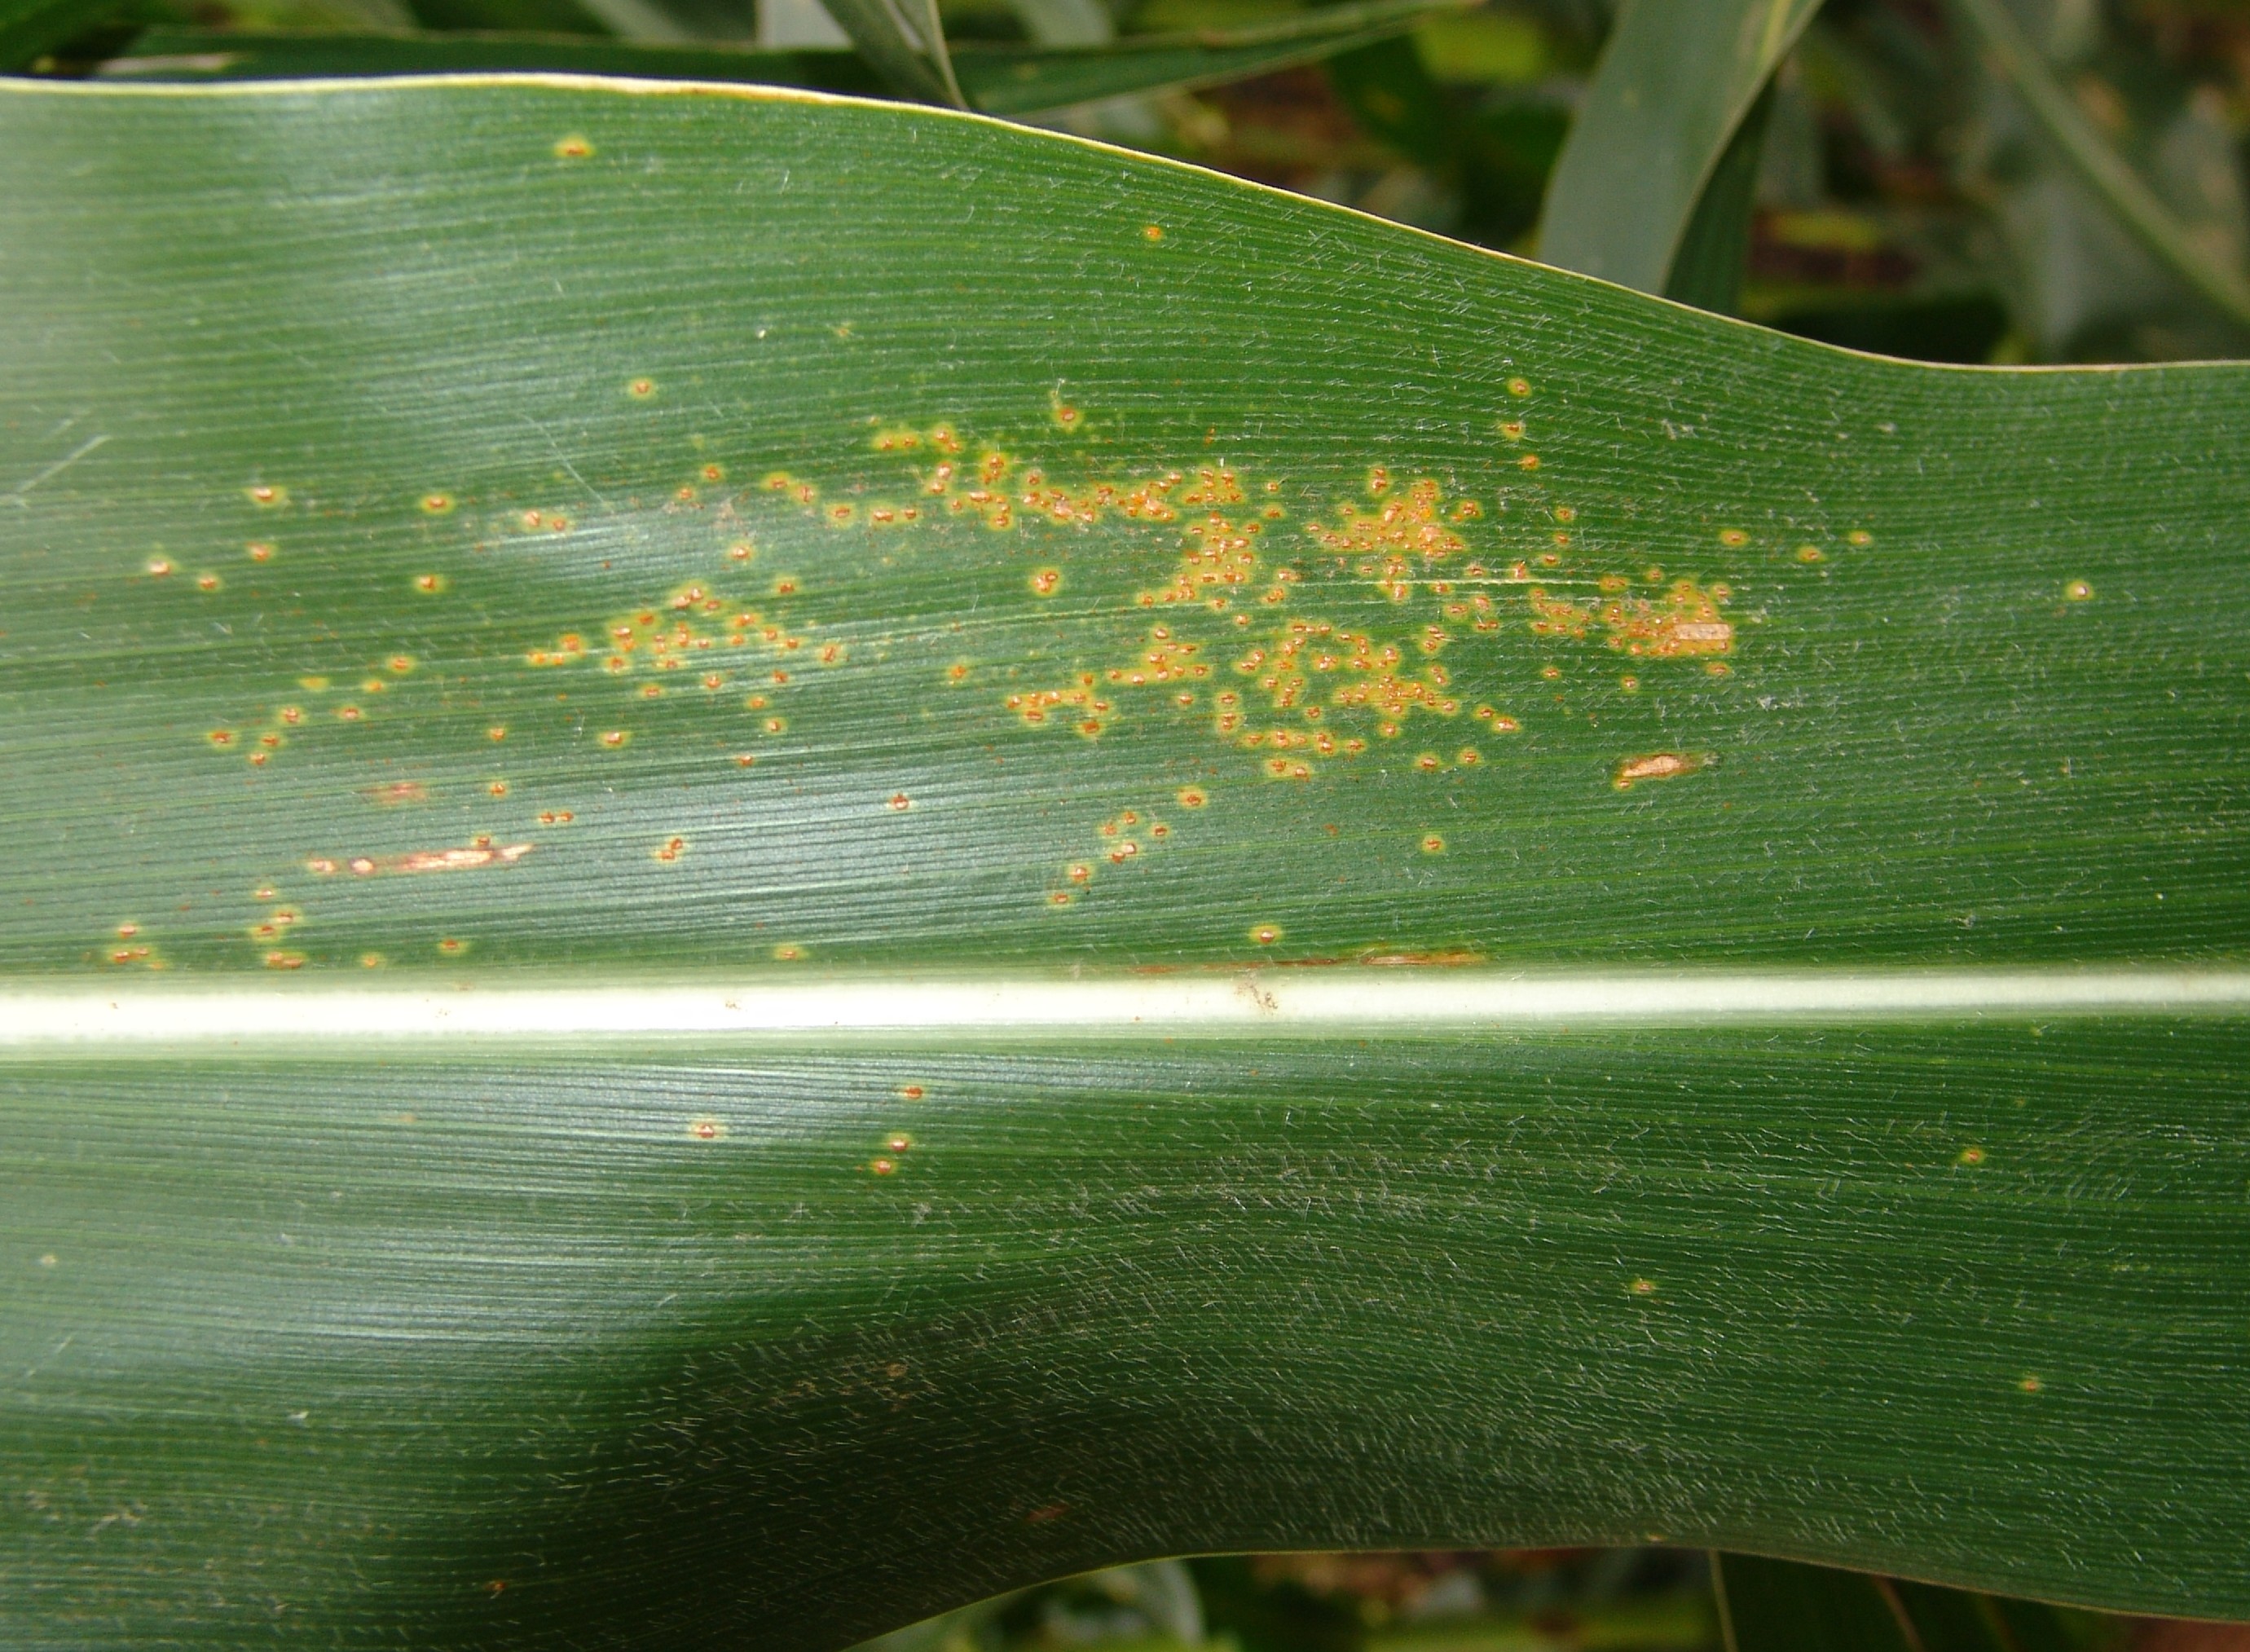 Early southern rust